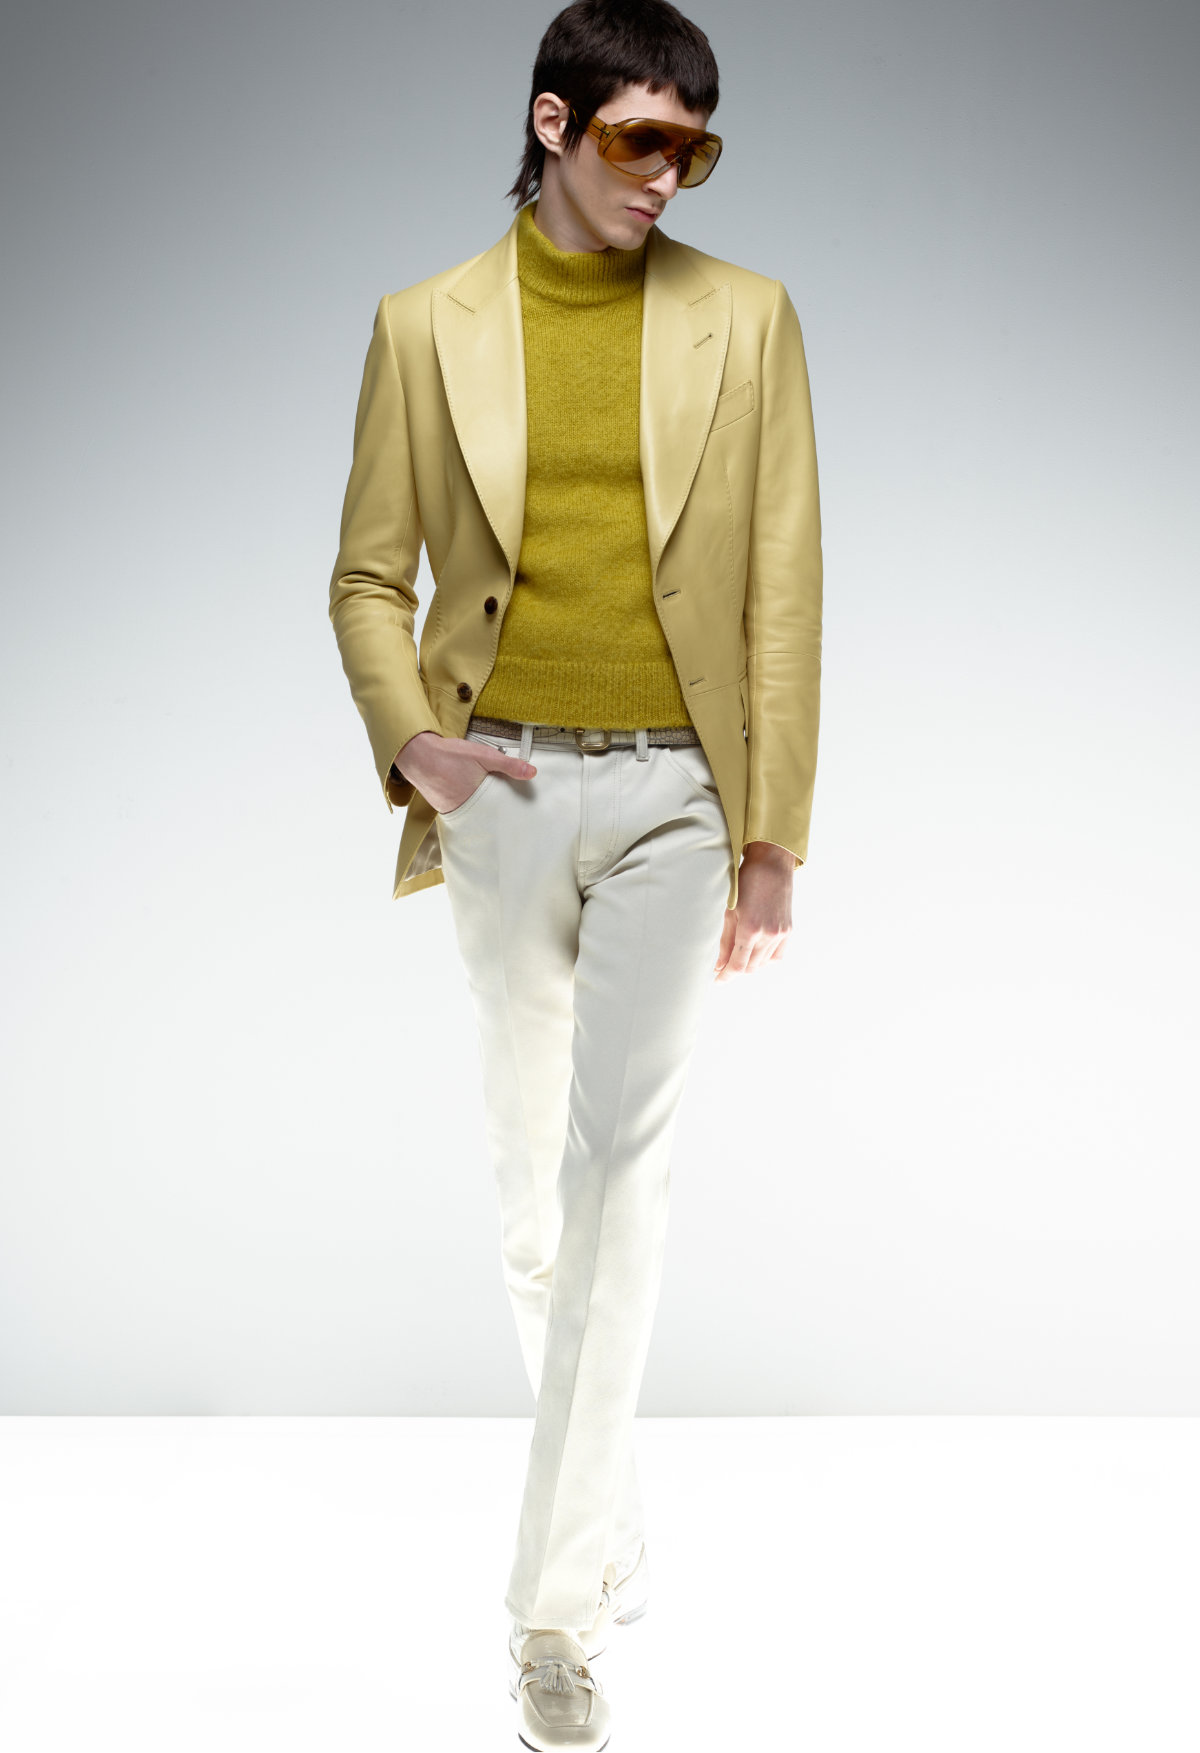 Tom Ford's Autum-Winter 2021 Menswear Collection